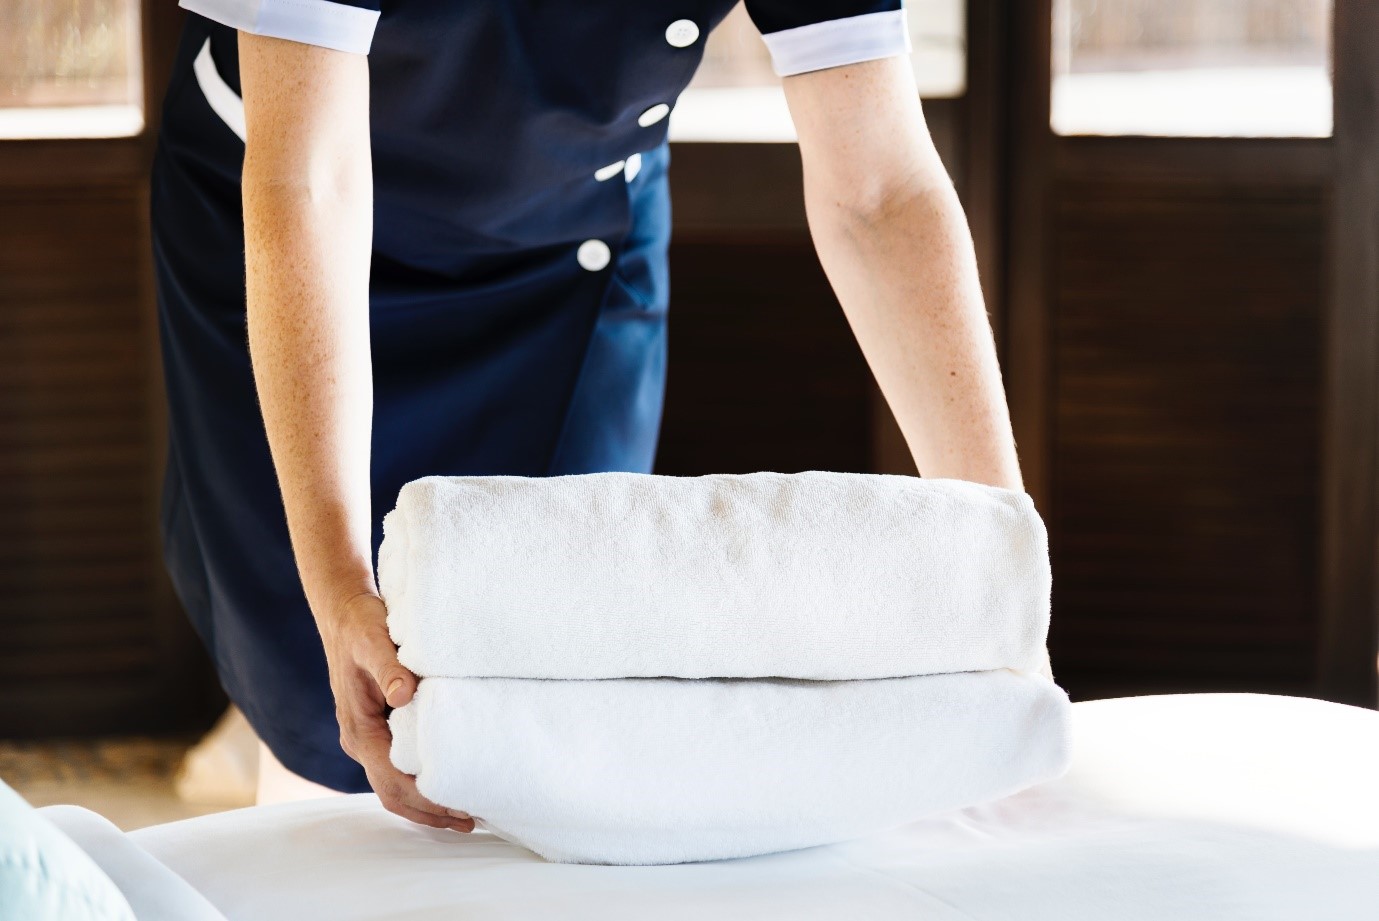 7 Essential Rules For Buying Towels: According To An Industry Insider